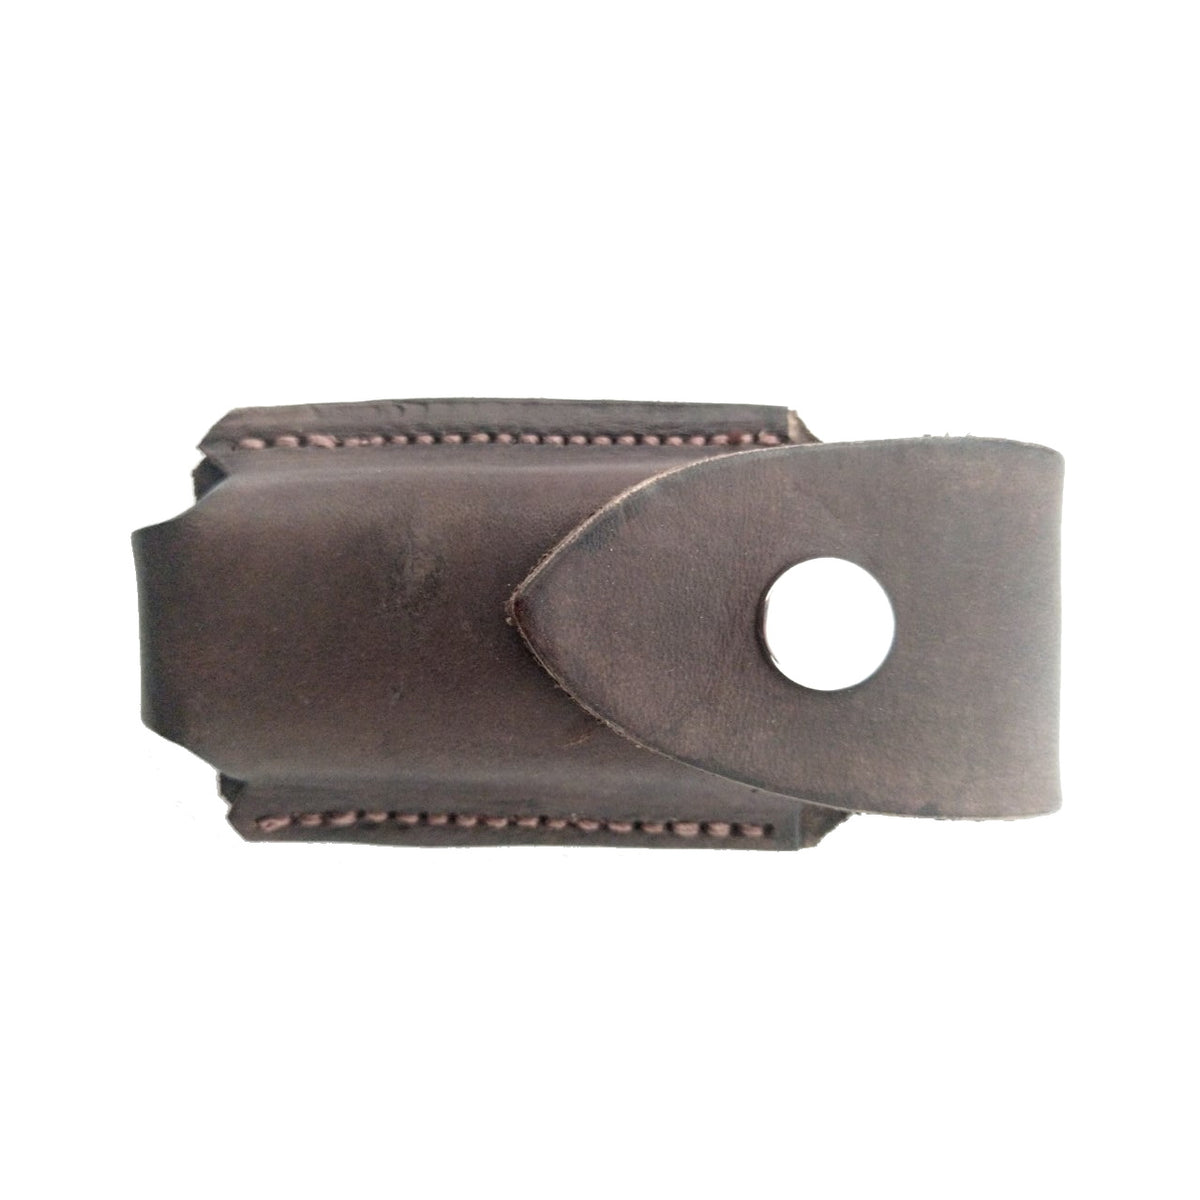 Huon Horizontal Leatherman Pouch in Brown